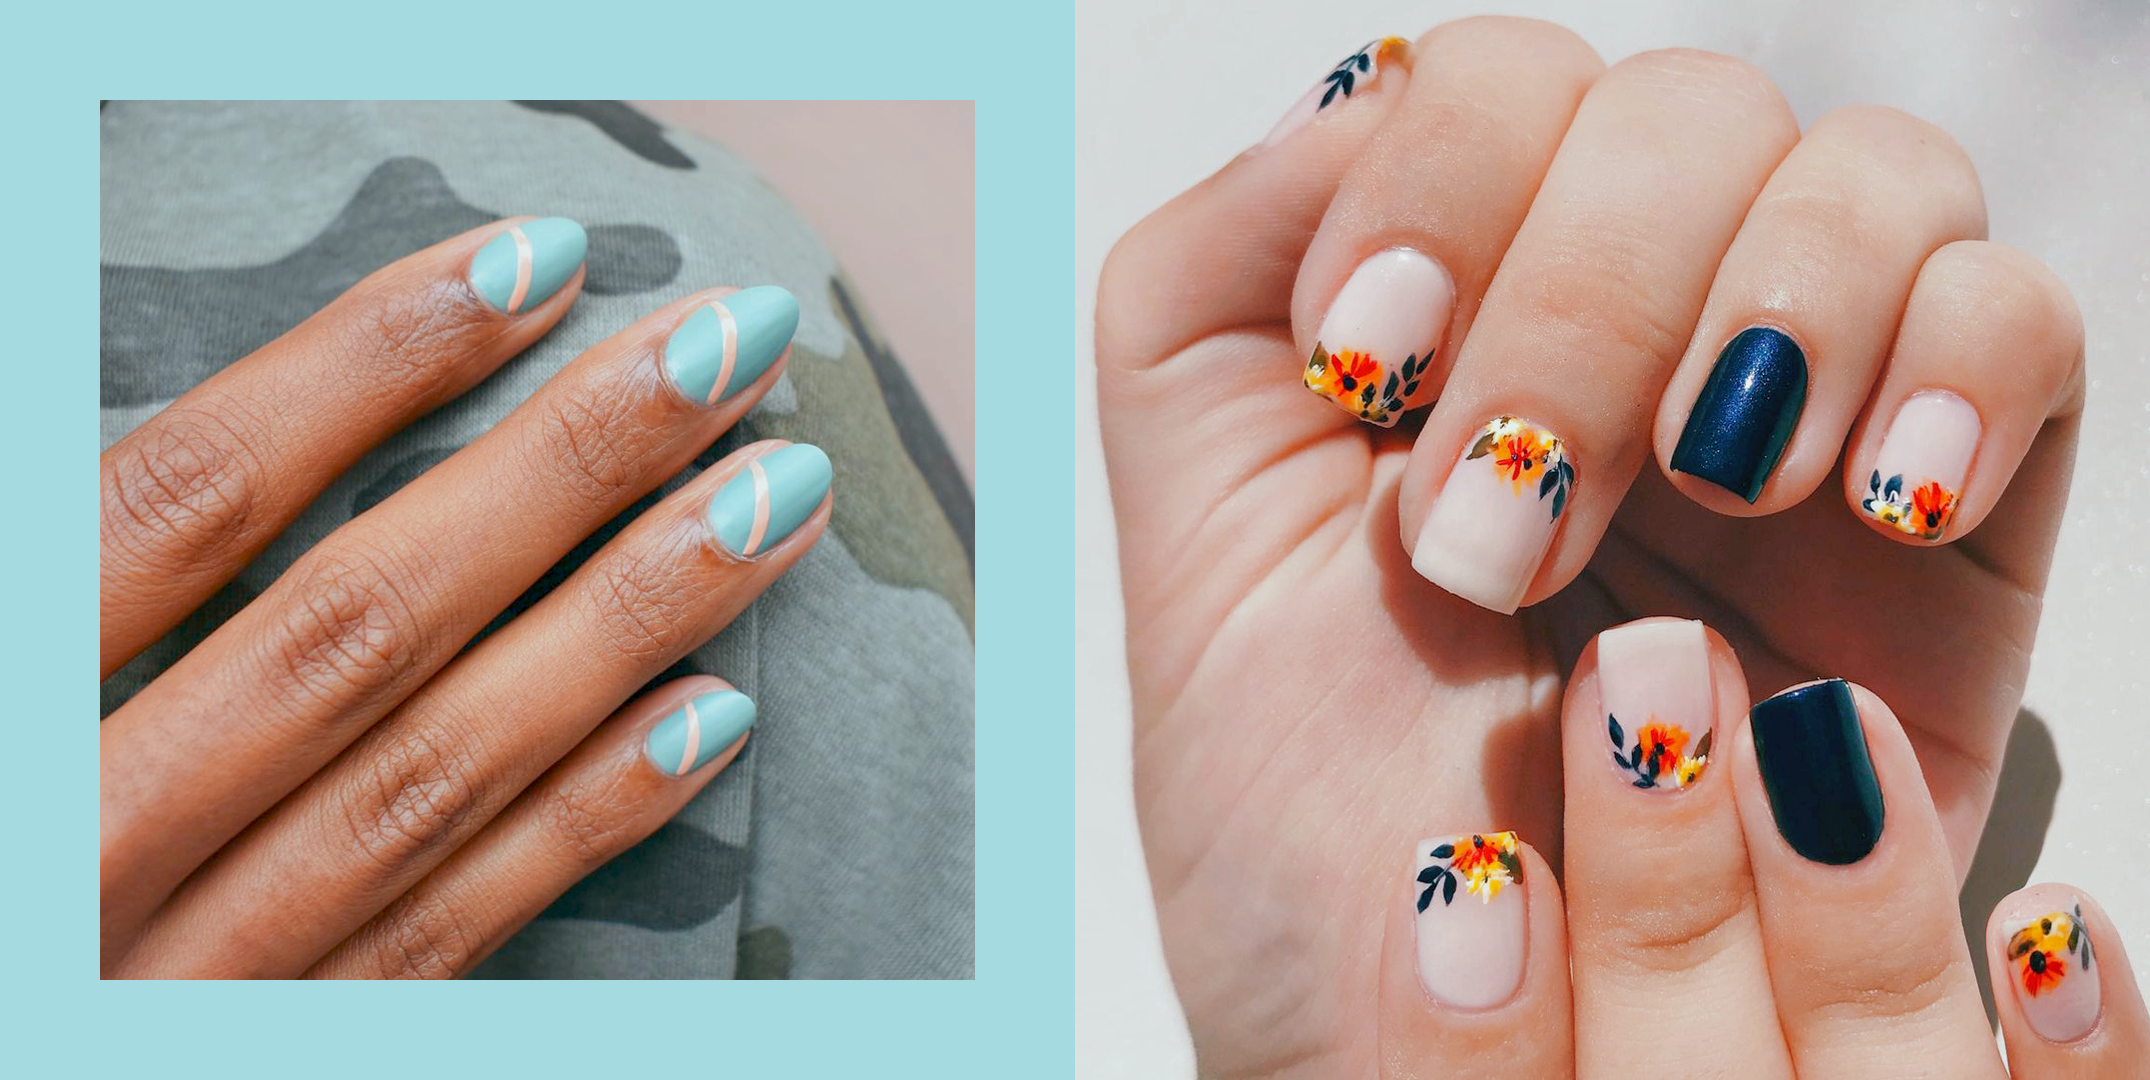 17 Gorgeous Fall Nail Ideas for Square Shape Nails - thepinkgoose.com |  Fall nail trends, Cute nails for fall, Nails